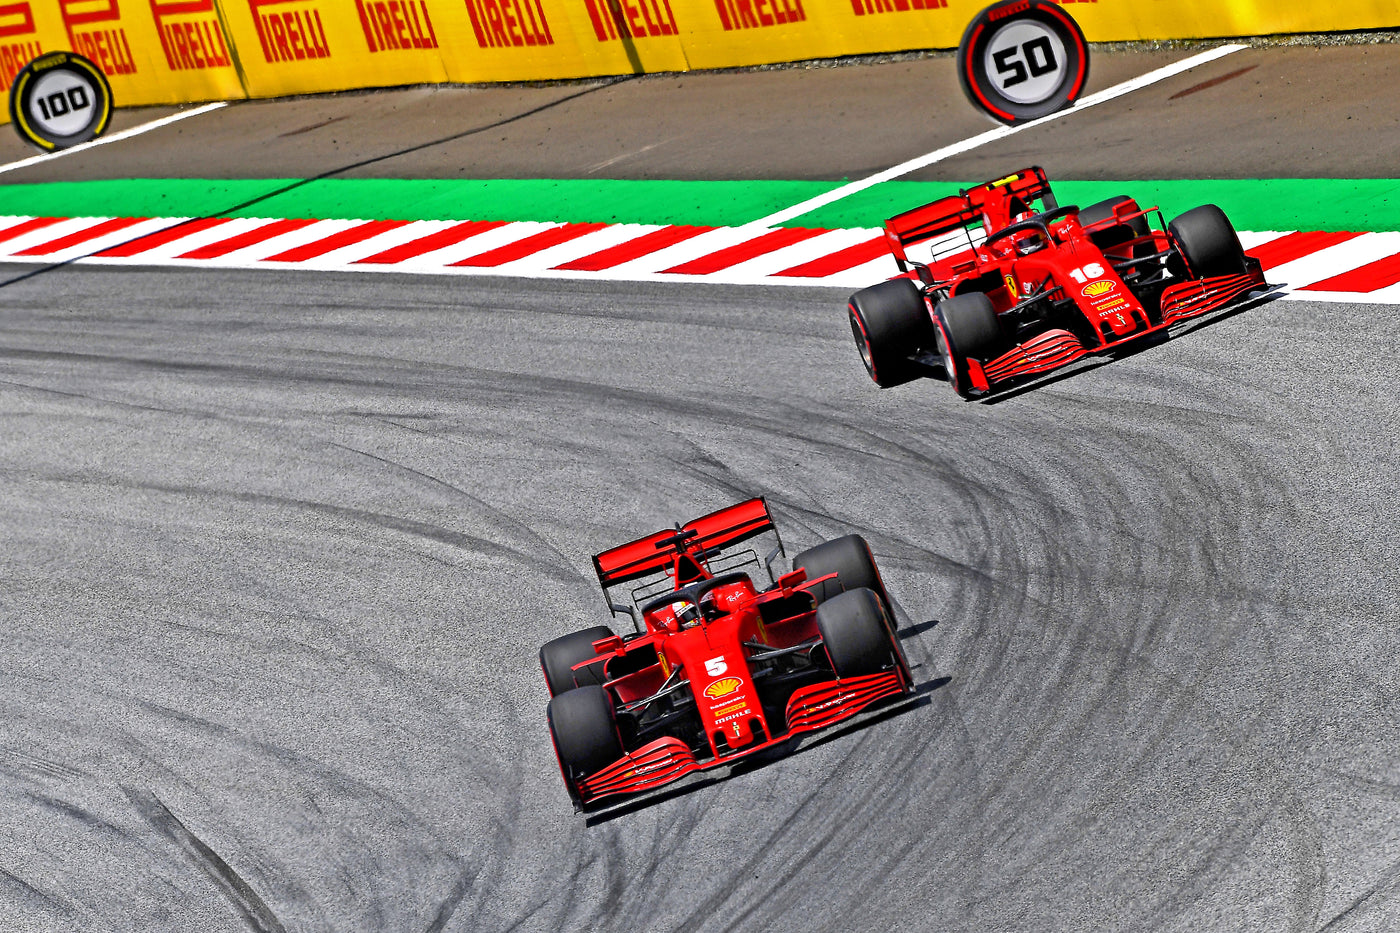 Austrian Grand Prix: Unexpected podium for Leclerc, disappointment for Hamilton